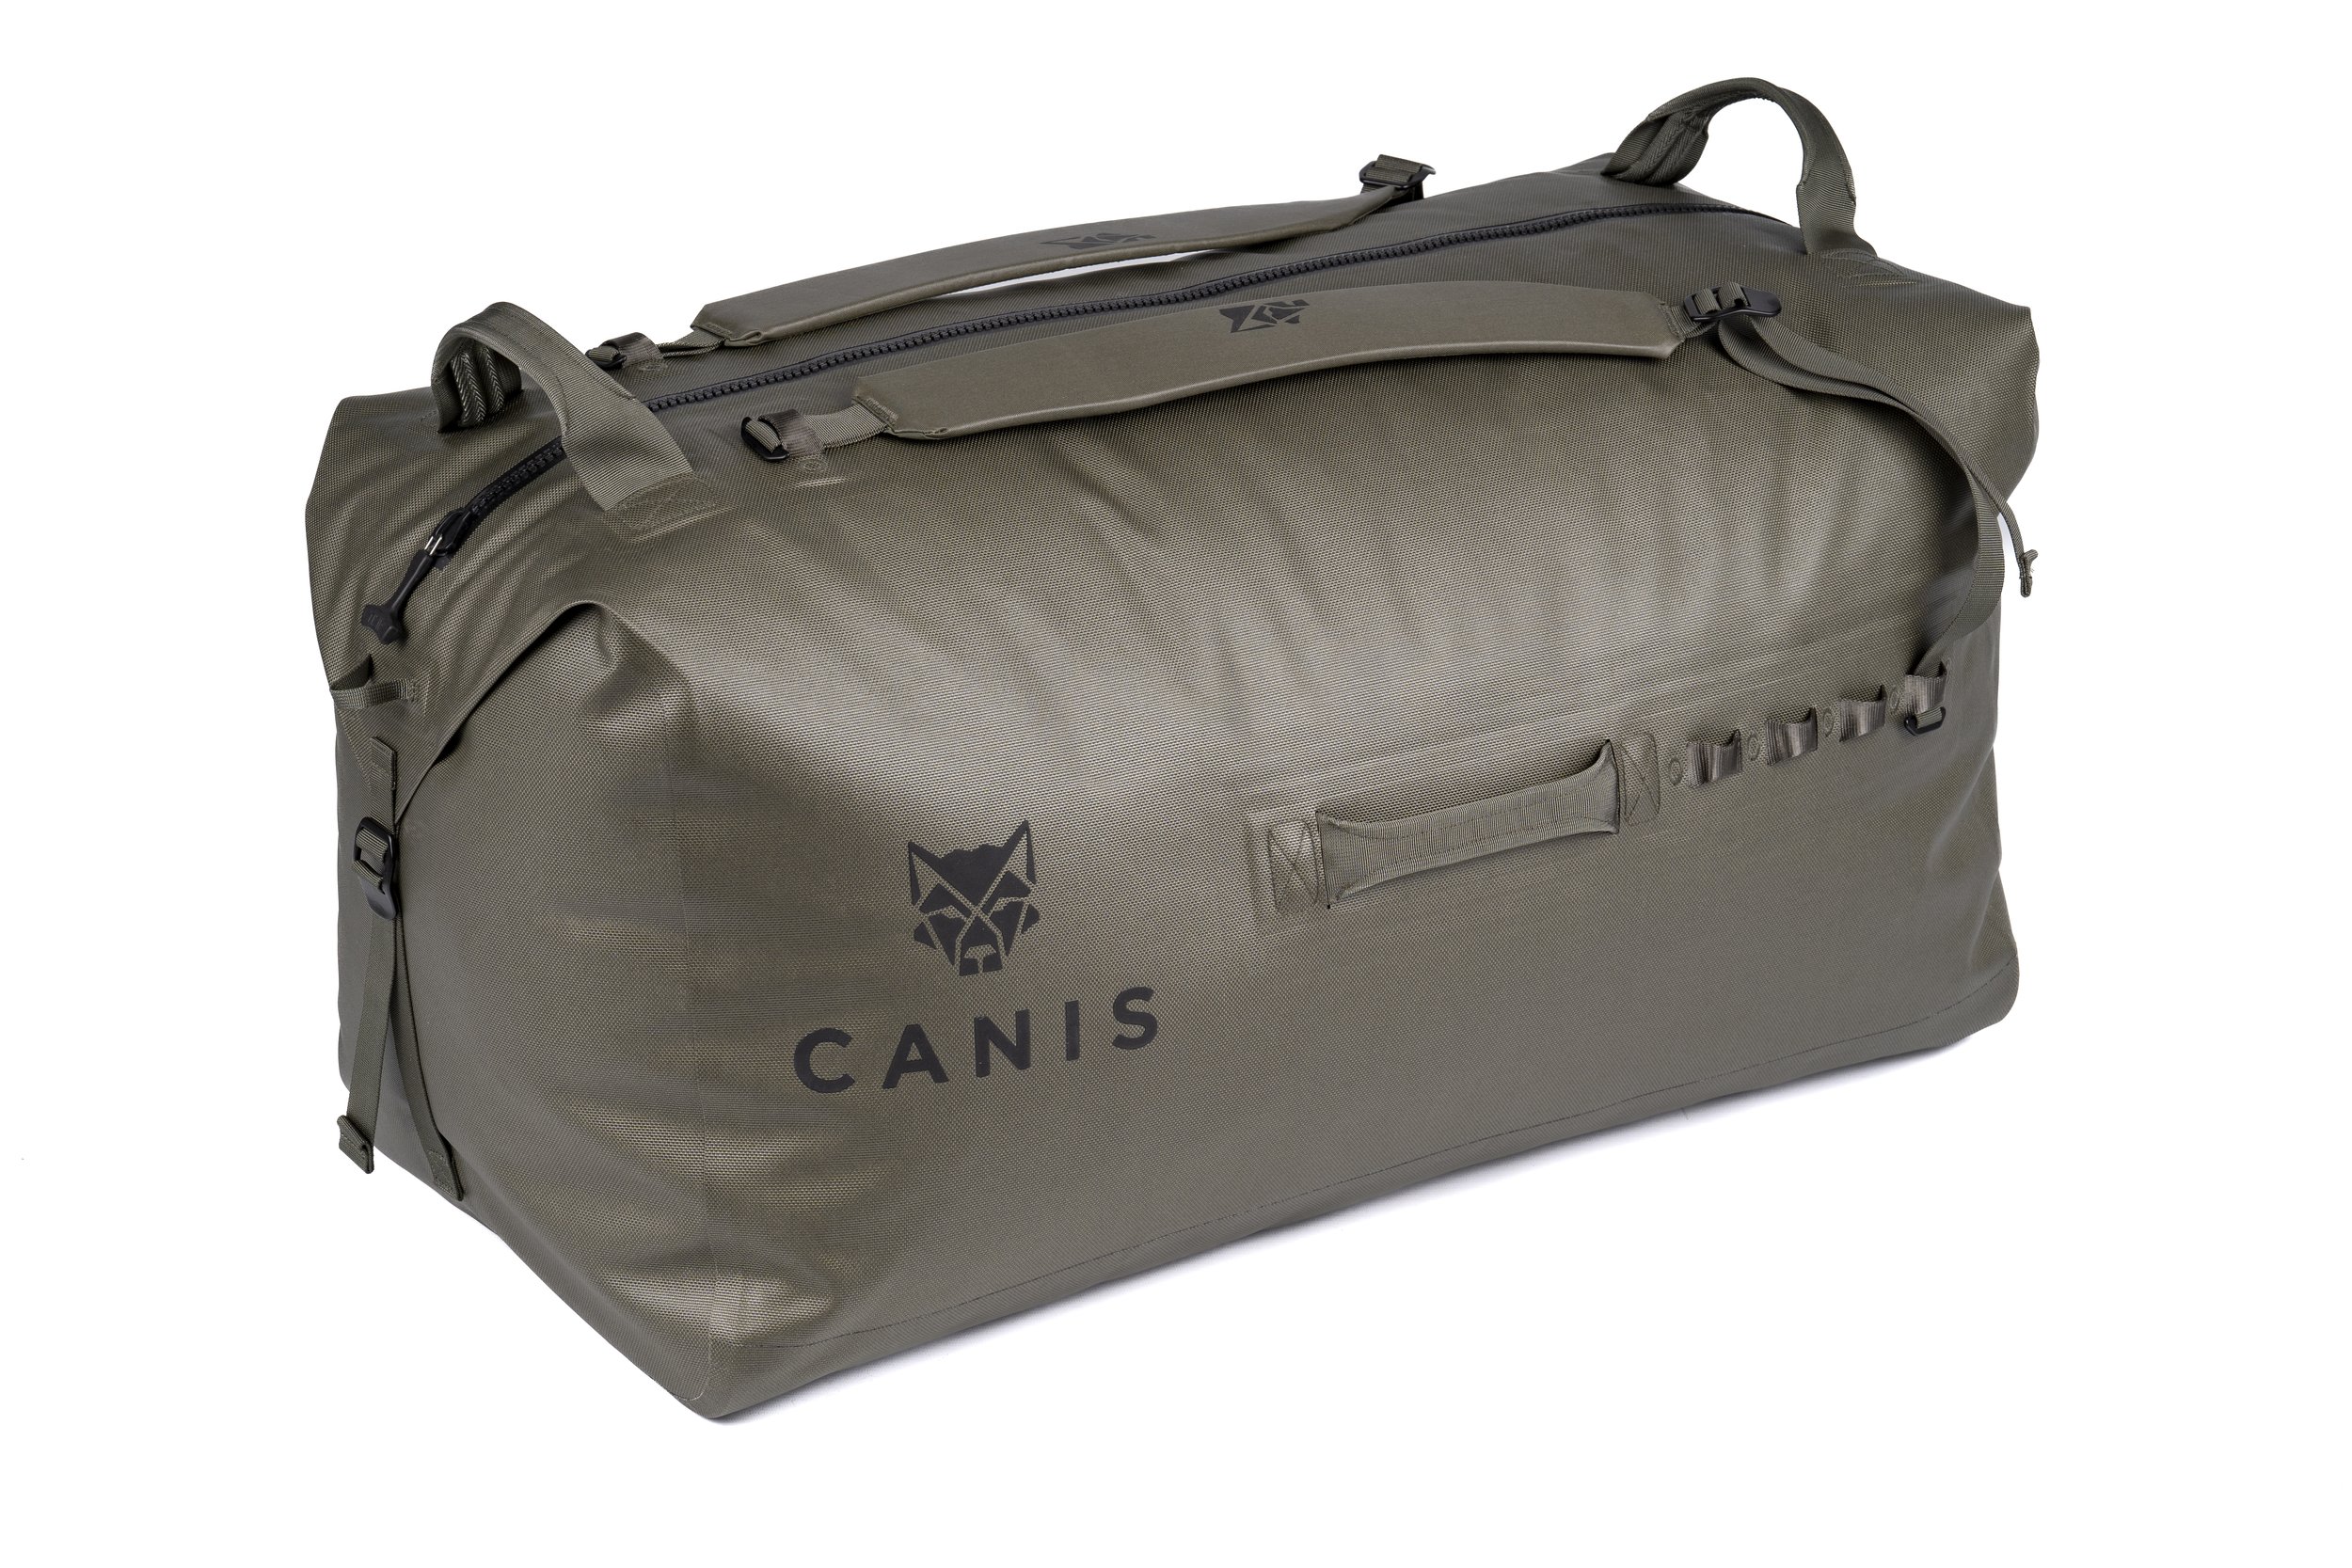 Canis_Duffel_140_sideview.jpg